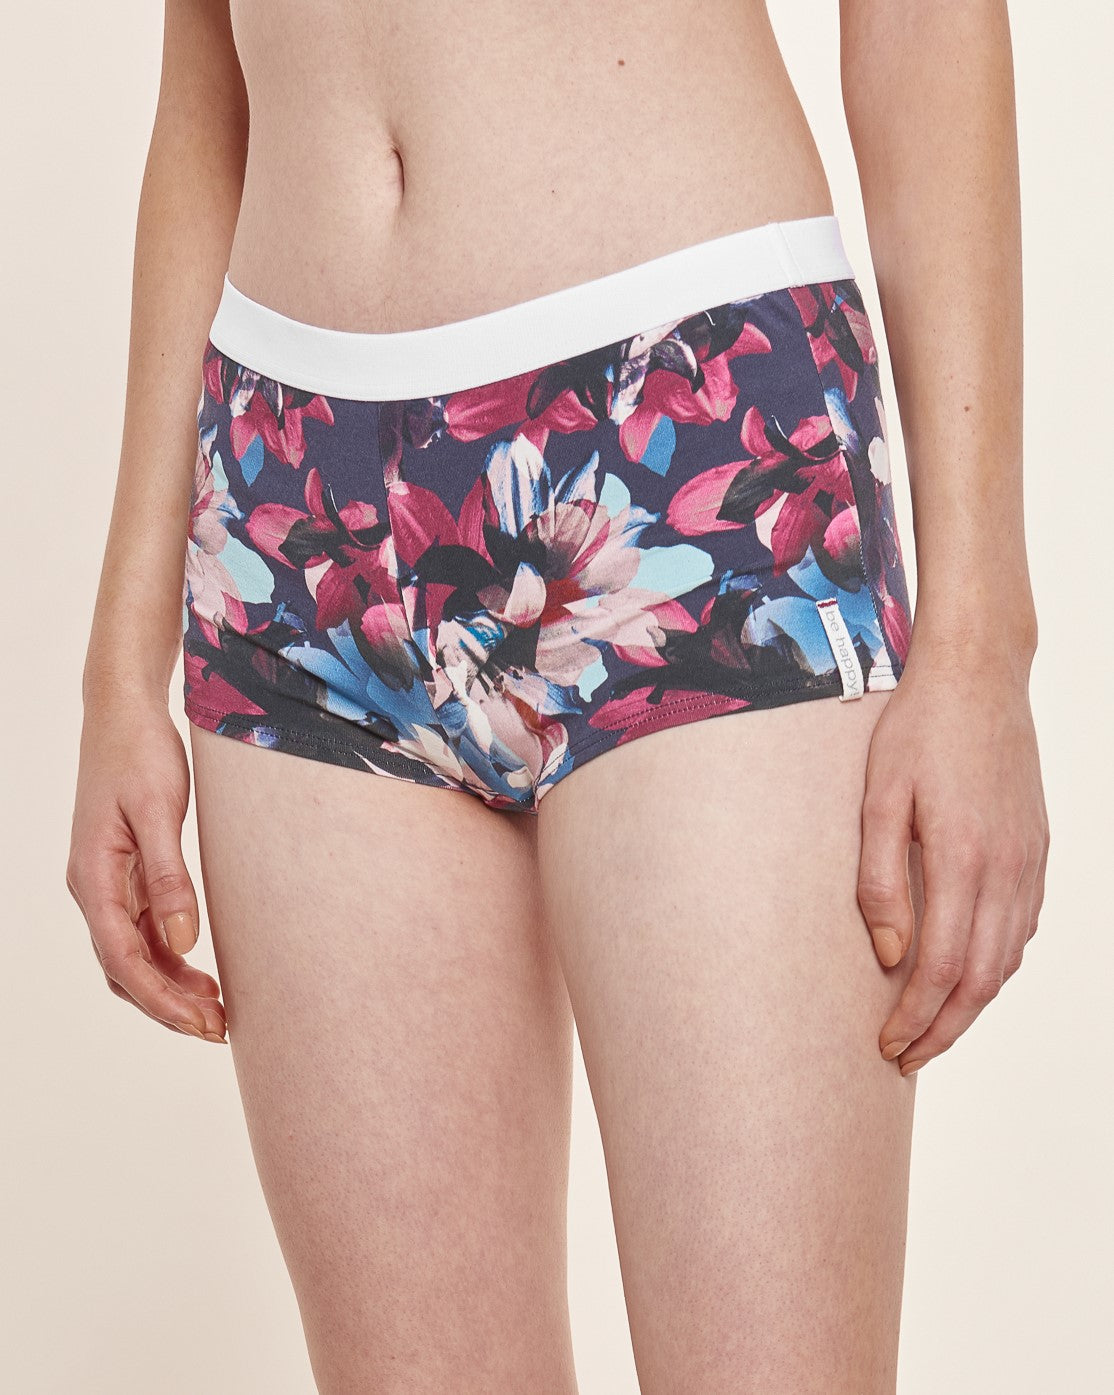 The Romantic Flower Cotton Boyshort, part of the Smart Casual line by Rösch from Germany.